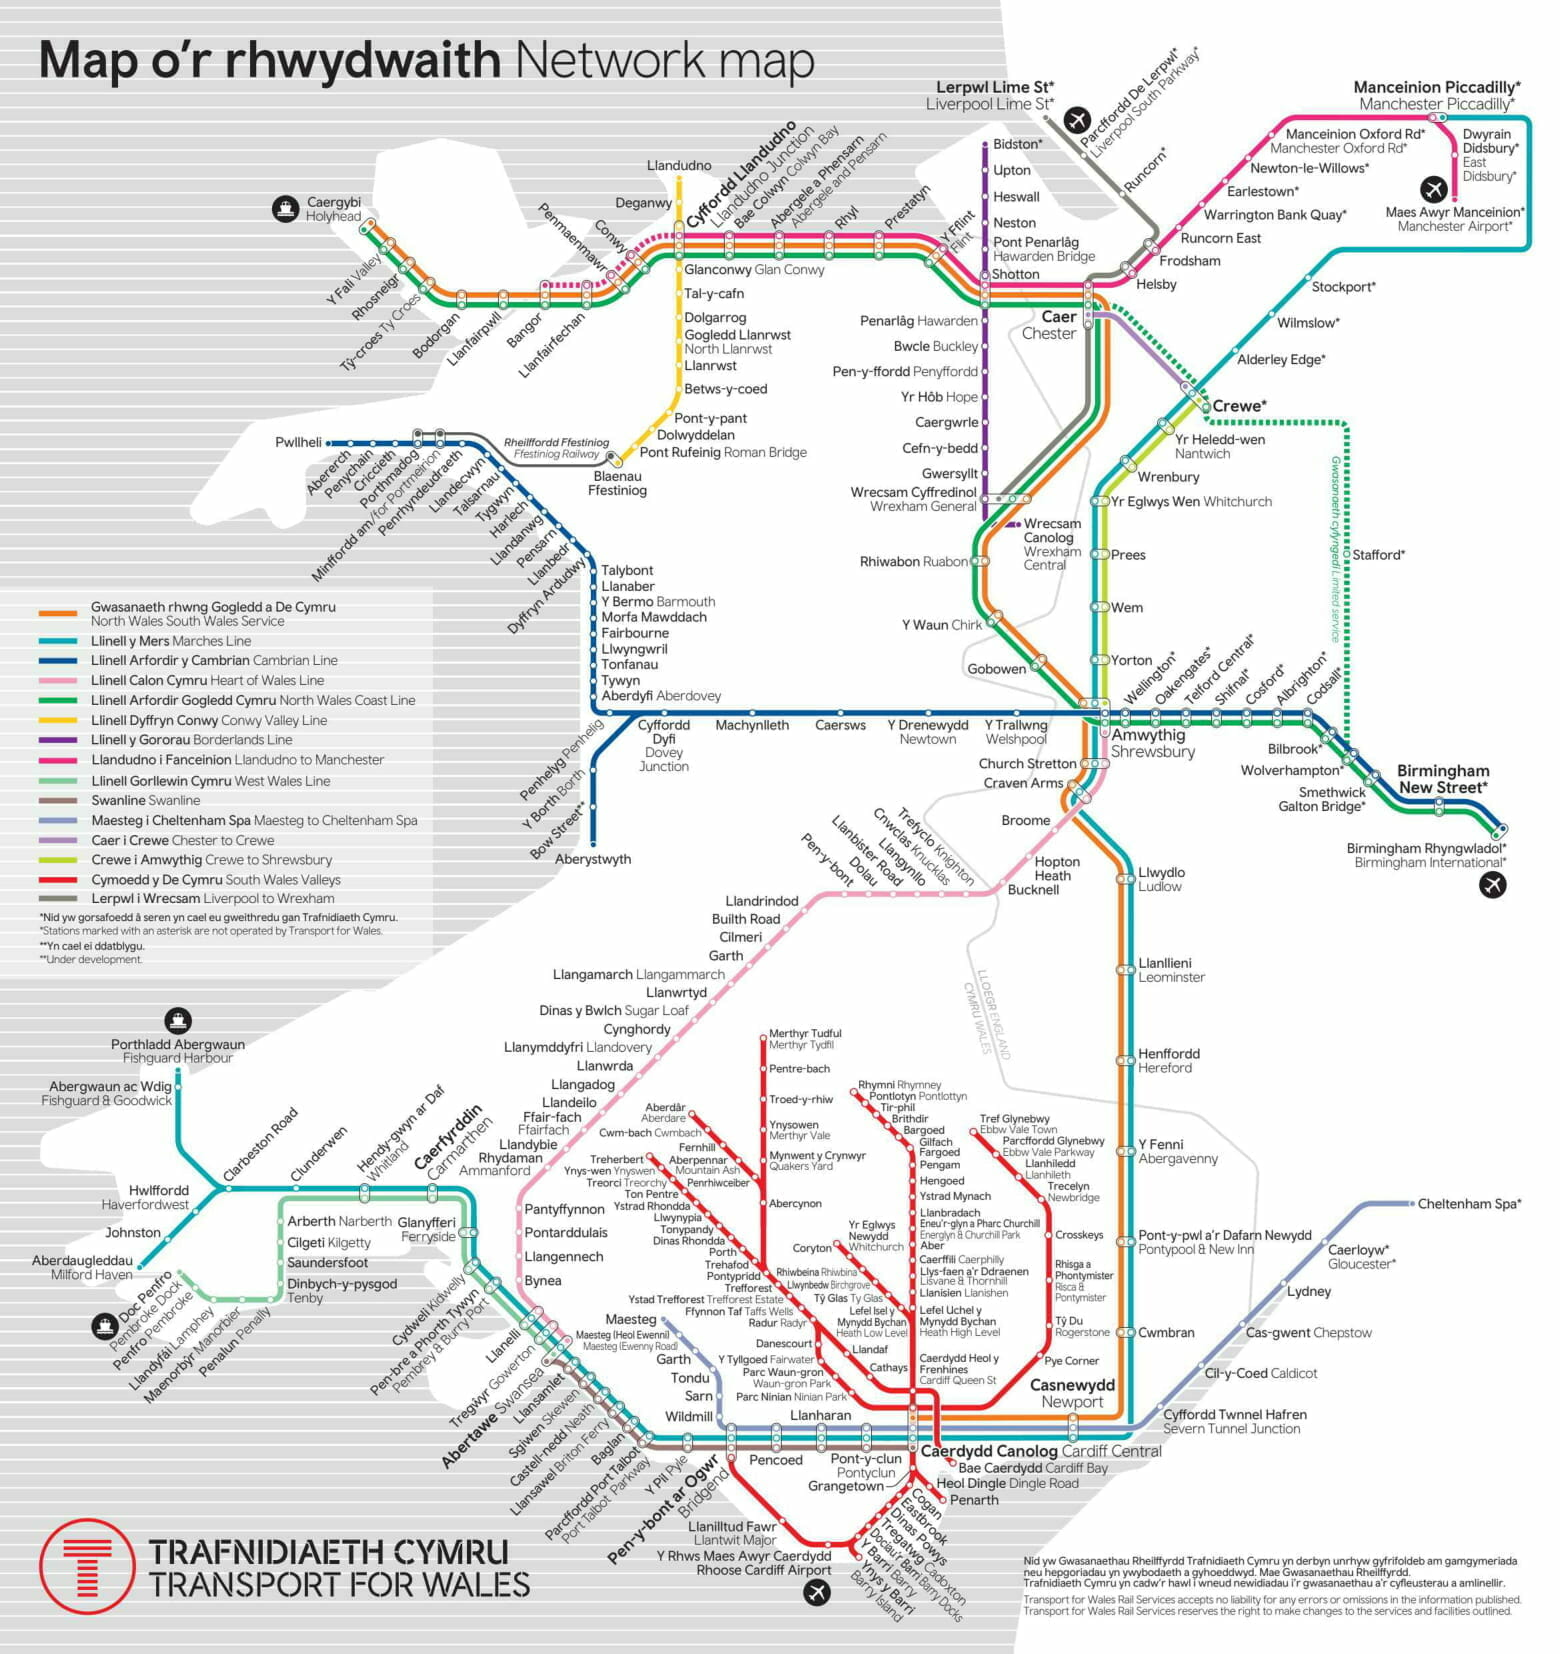 arriva trains wales network map